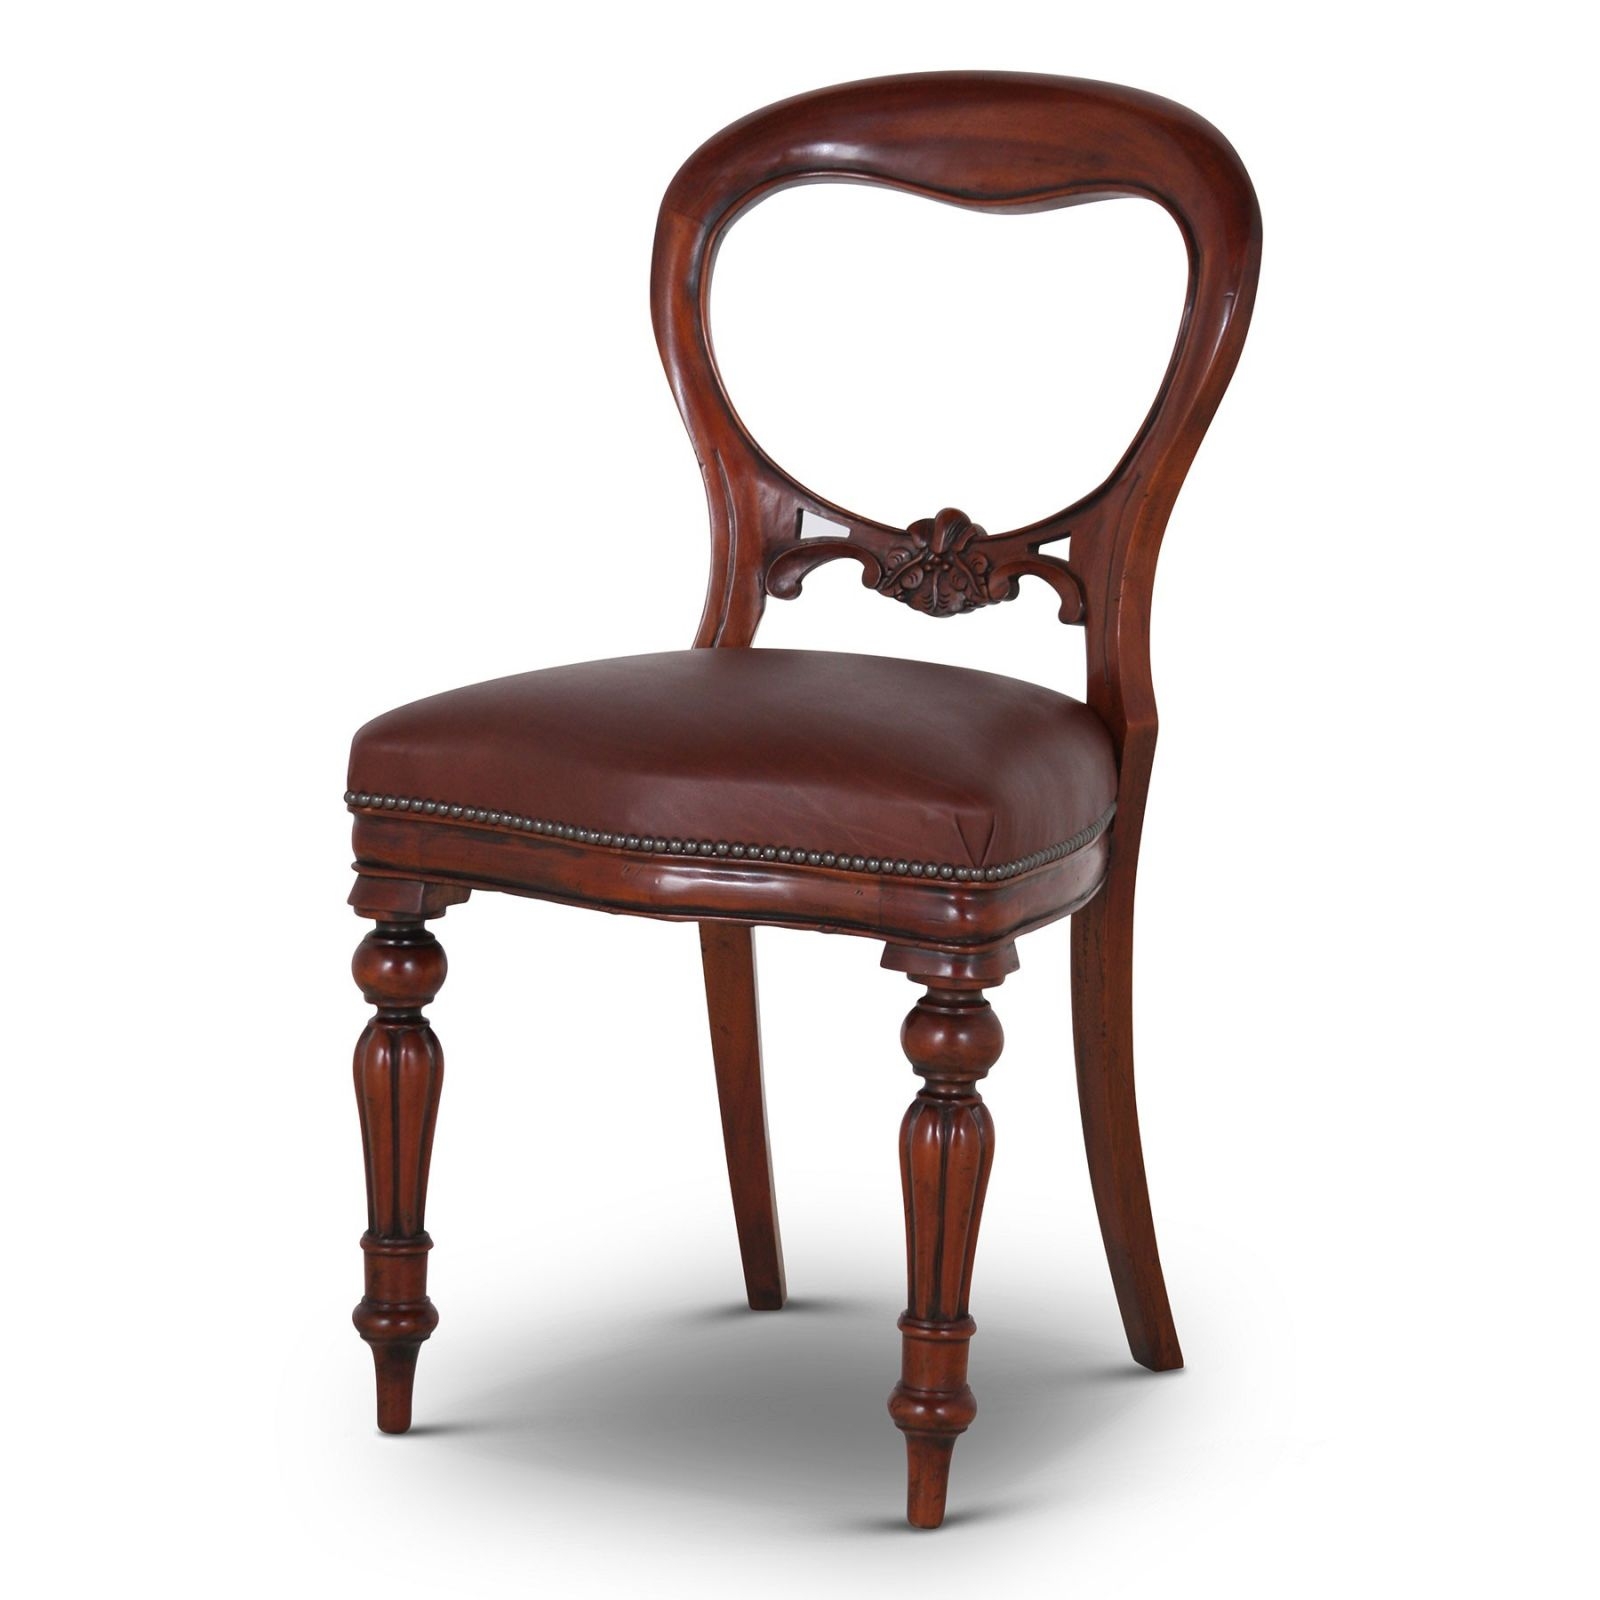 Victorian style balloon back dining chair with brown leather seat